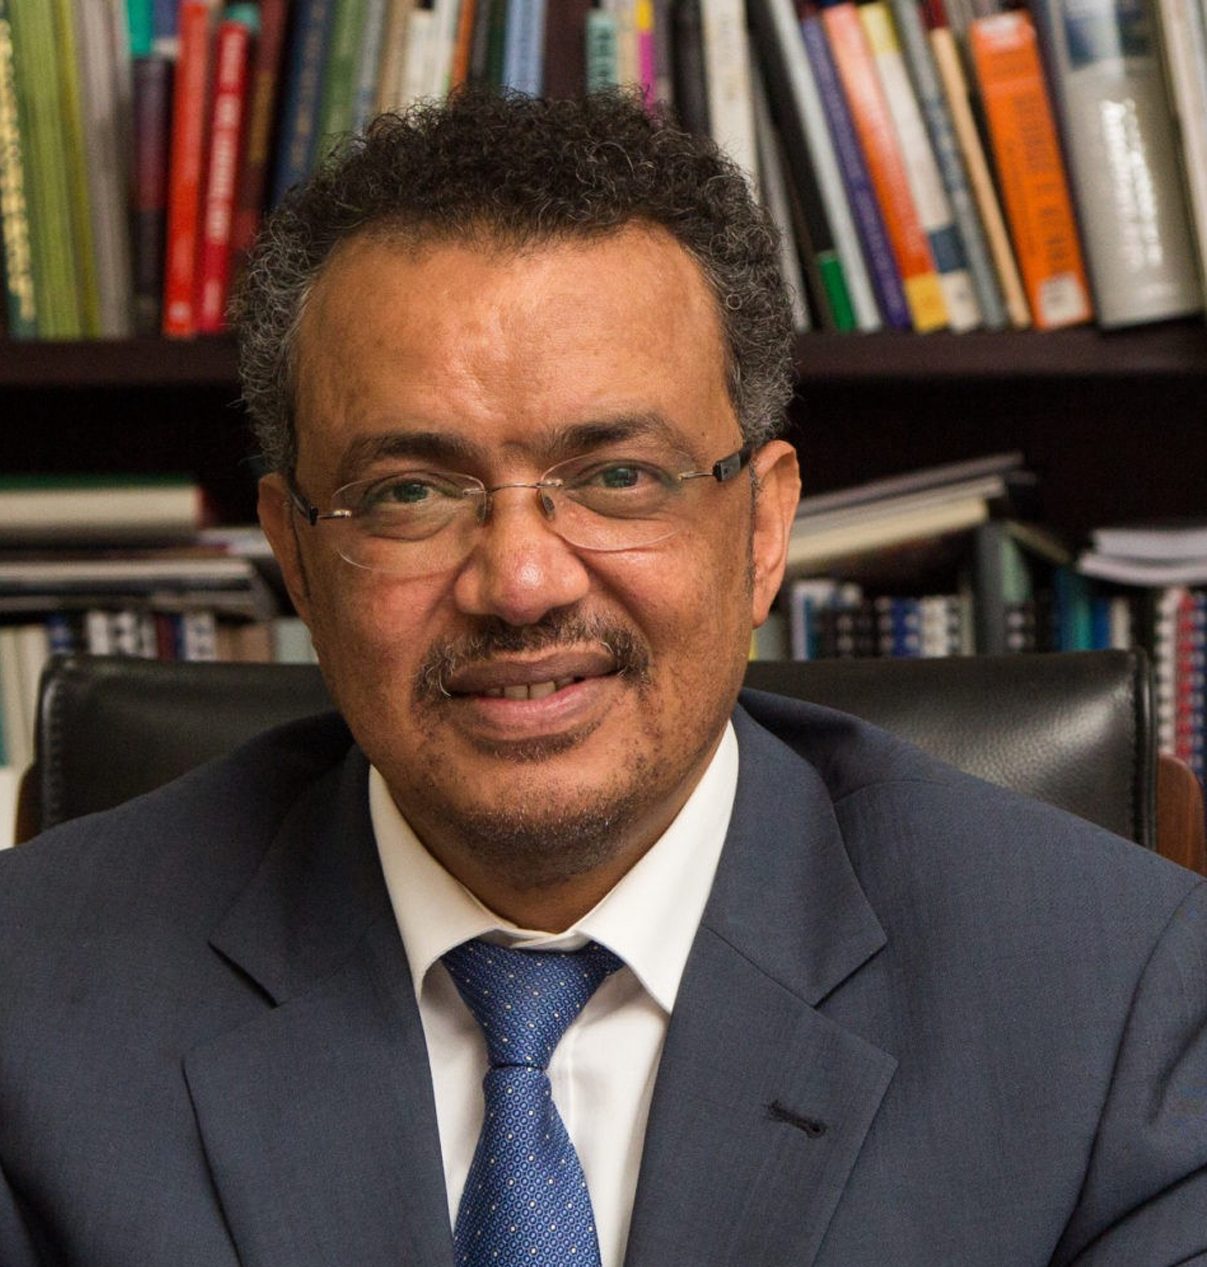 To Deliver Health for All We Must Prioritize Gender Equality: A Q&A with Dr. Tedros Adhanom Ghebreyesus